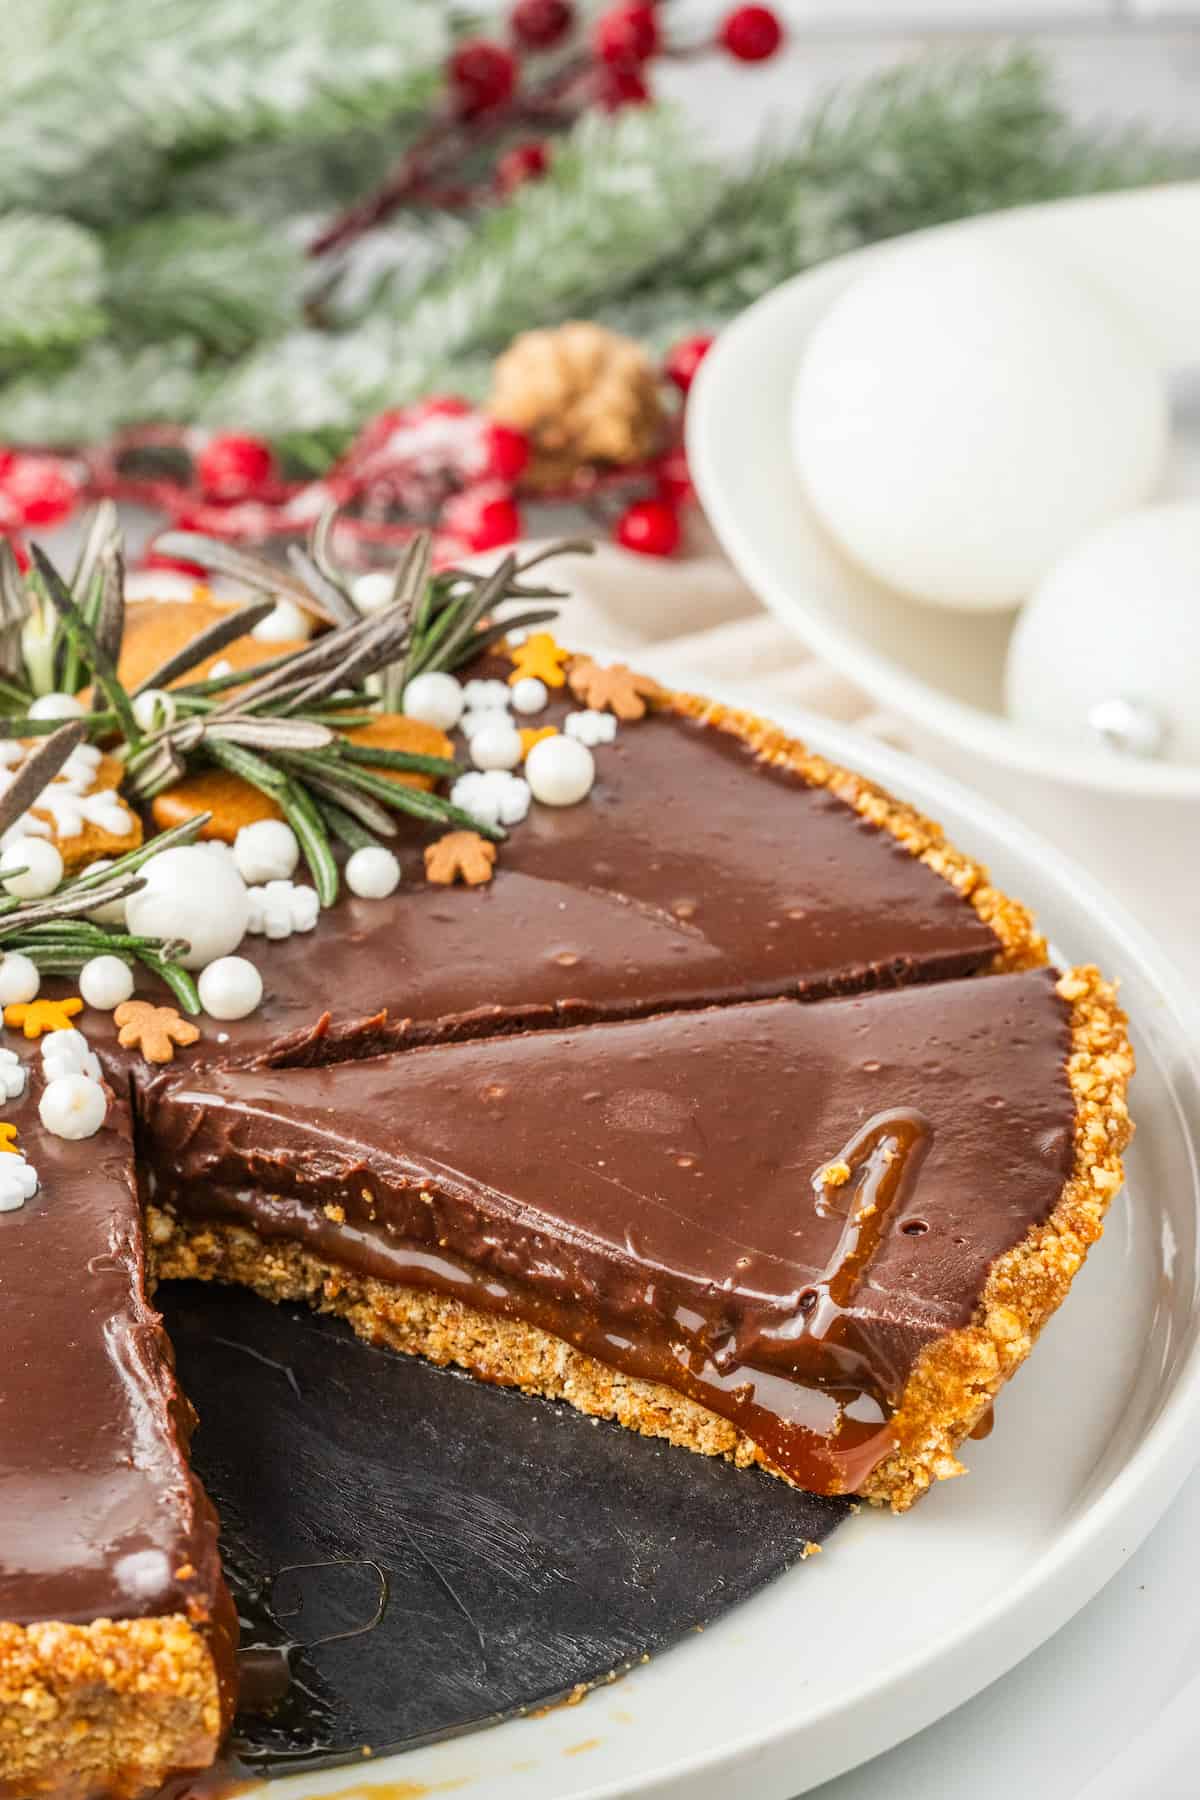 A Gingerbread Chocolate Tart with a slice taken out of it.